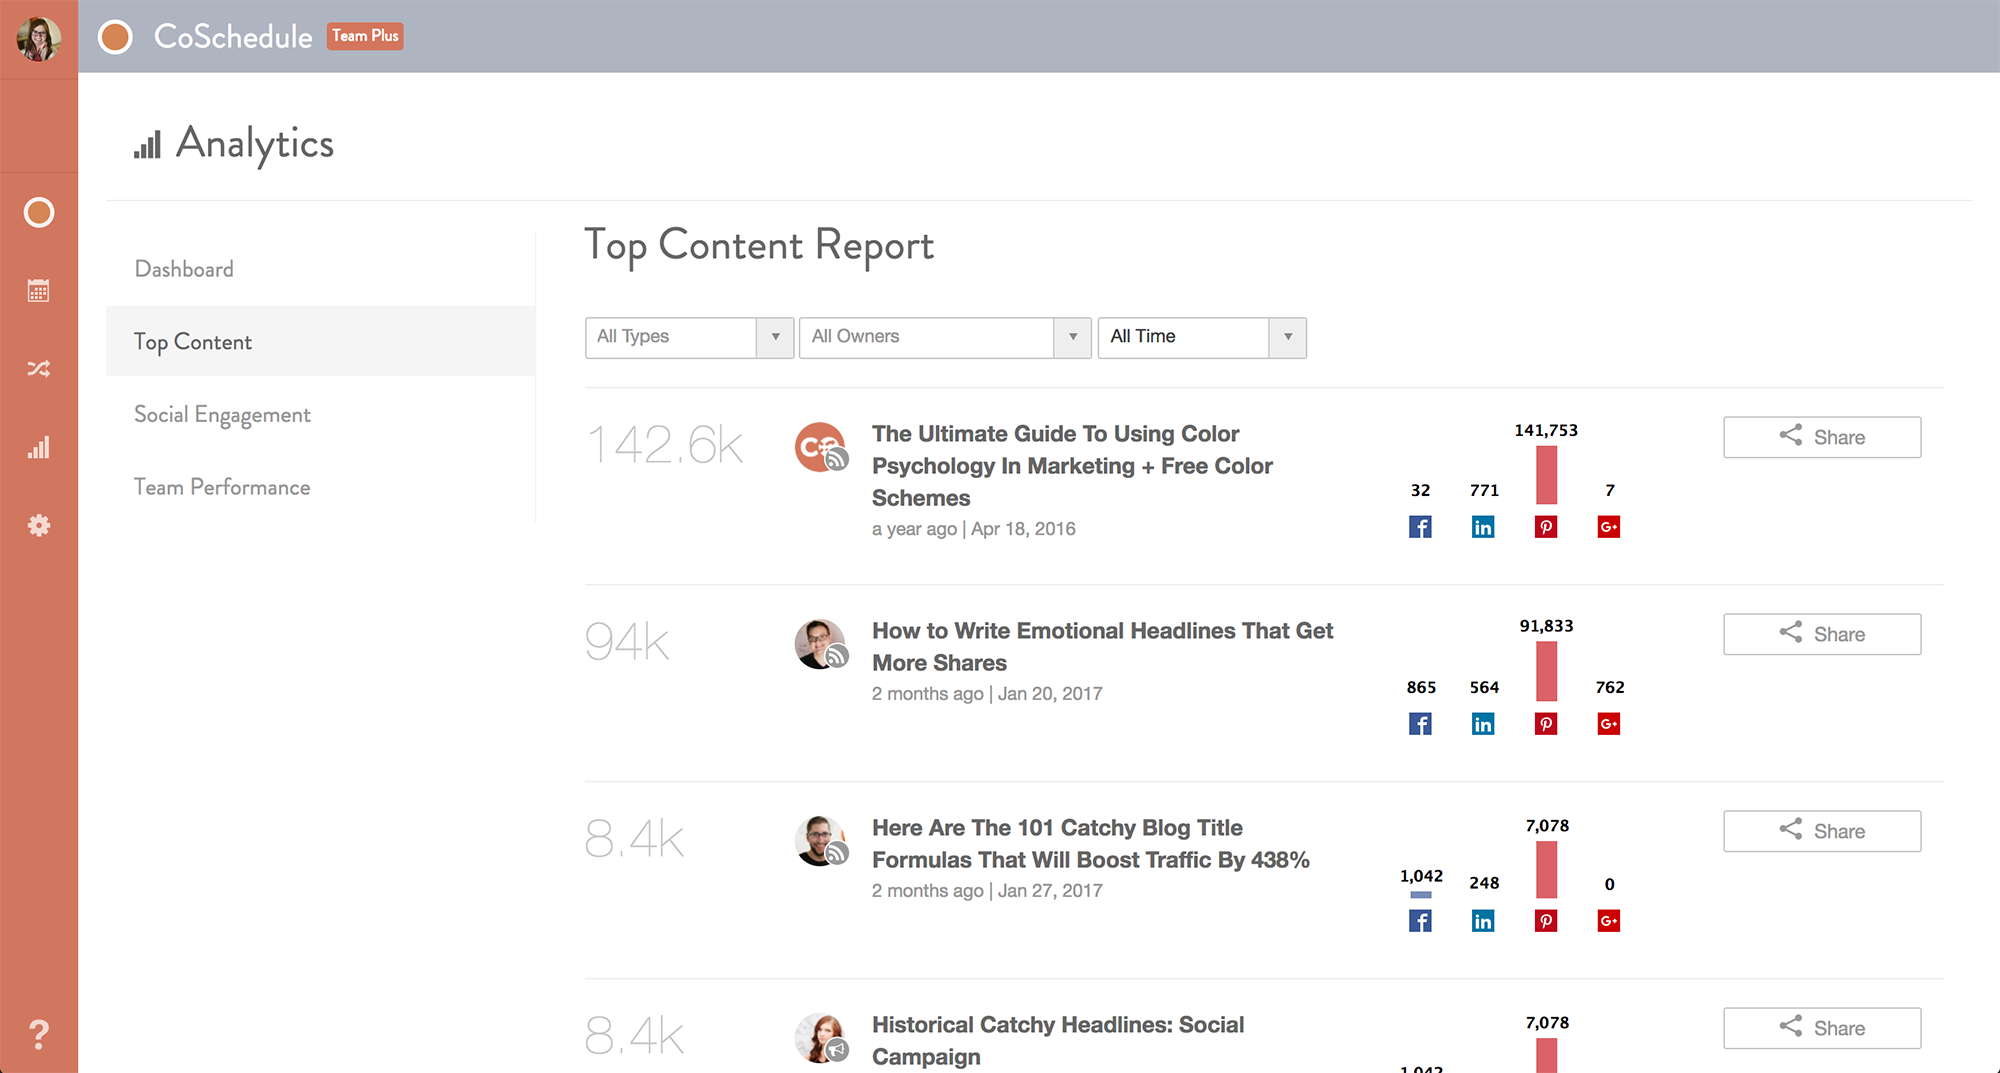 CoSchedule's top content report lets you know what pieces of content are crushing it